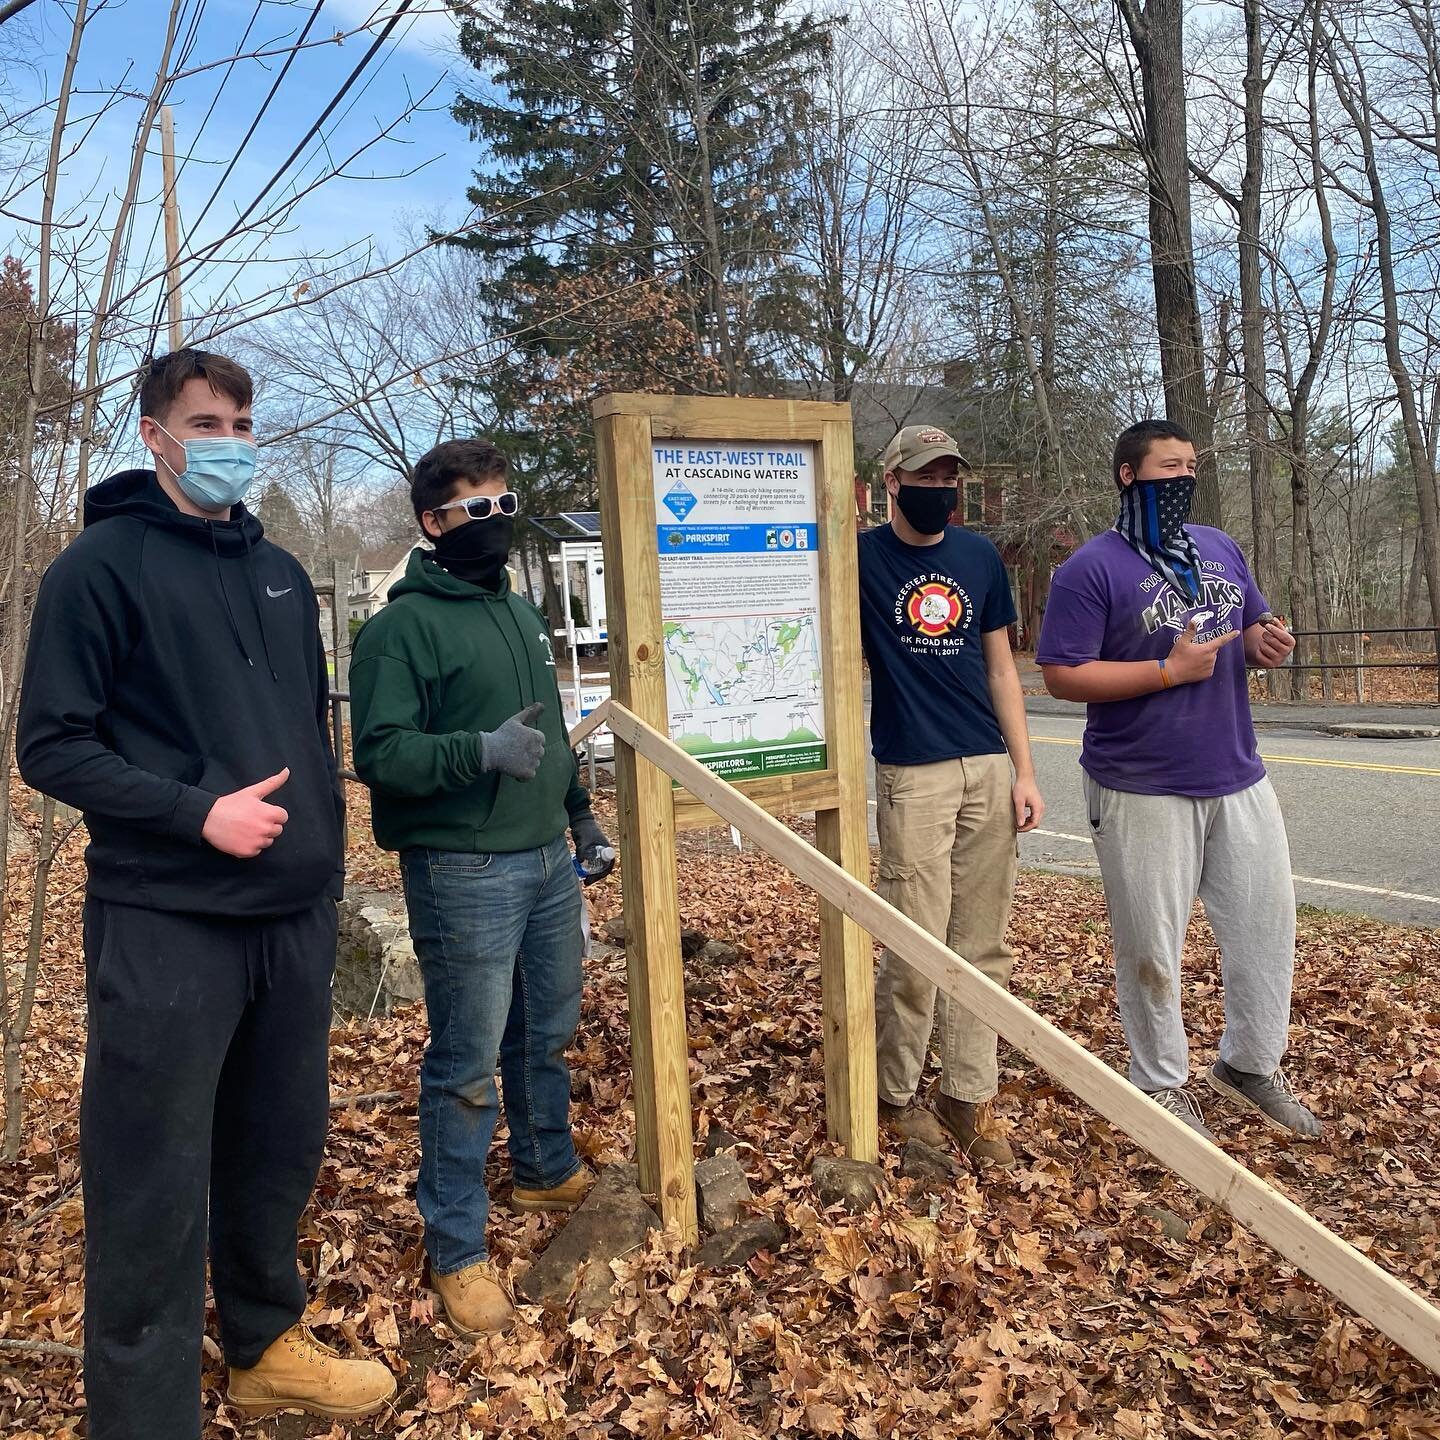 The kiosk install team makes its final push to install the East-West Trail&rsquo;s final two kiosk frames! Great work by Rutland Eagle Scout AJ and team and Rick Miller!